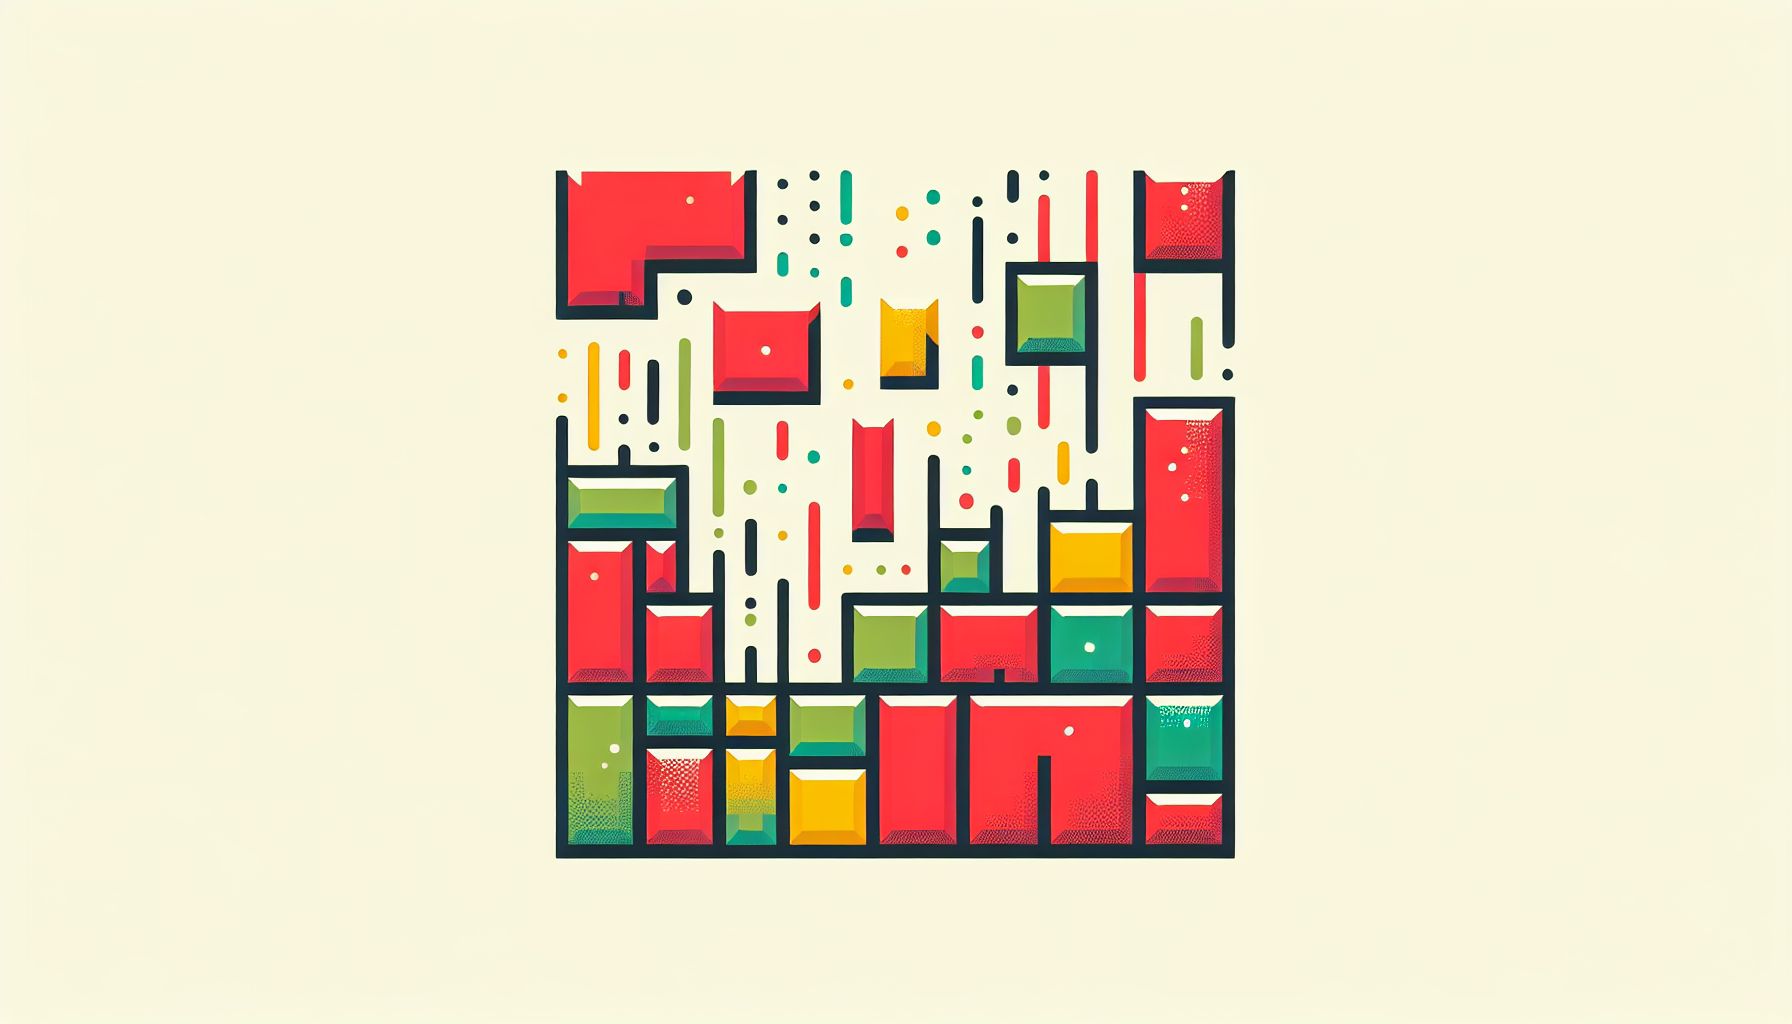 Tetris in flat illustration style and white background, red #f47574, green #88c7a8, yellow #fcc44b, and blue #645bc8 colors.